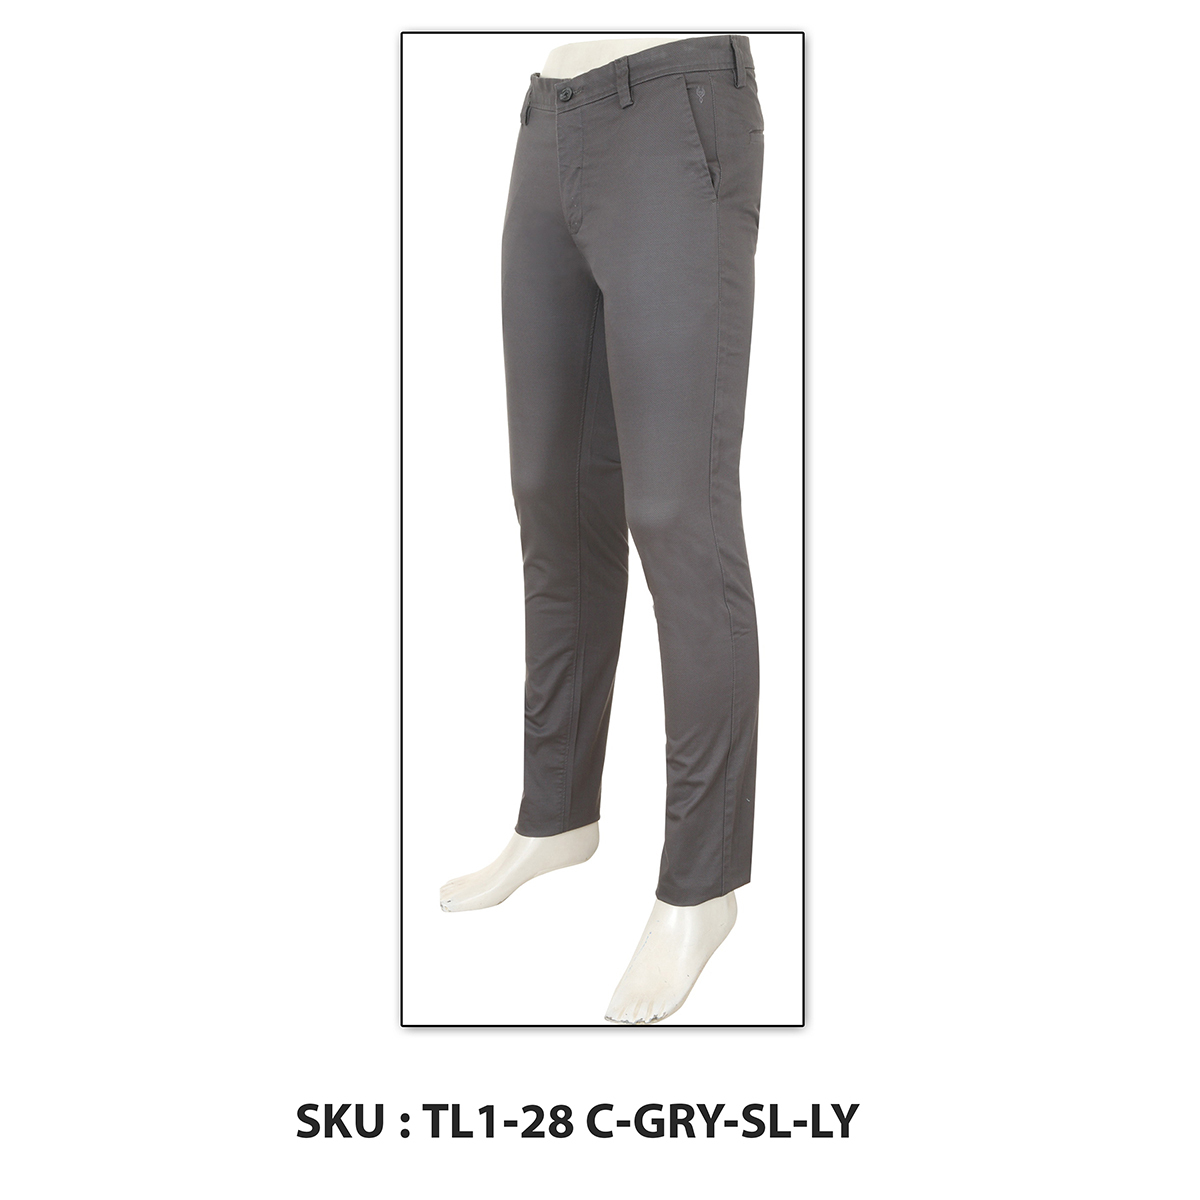 Classic Polo Mens Trousers Tl1-28 C-Gry-Sl-Ly Grey 34